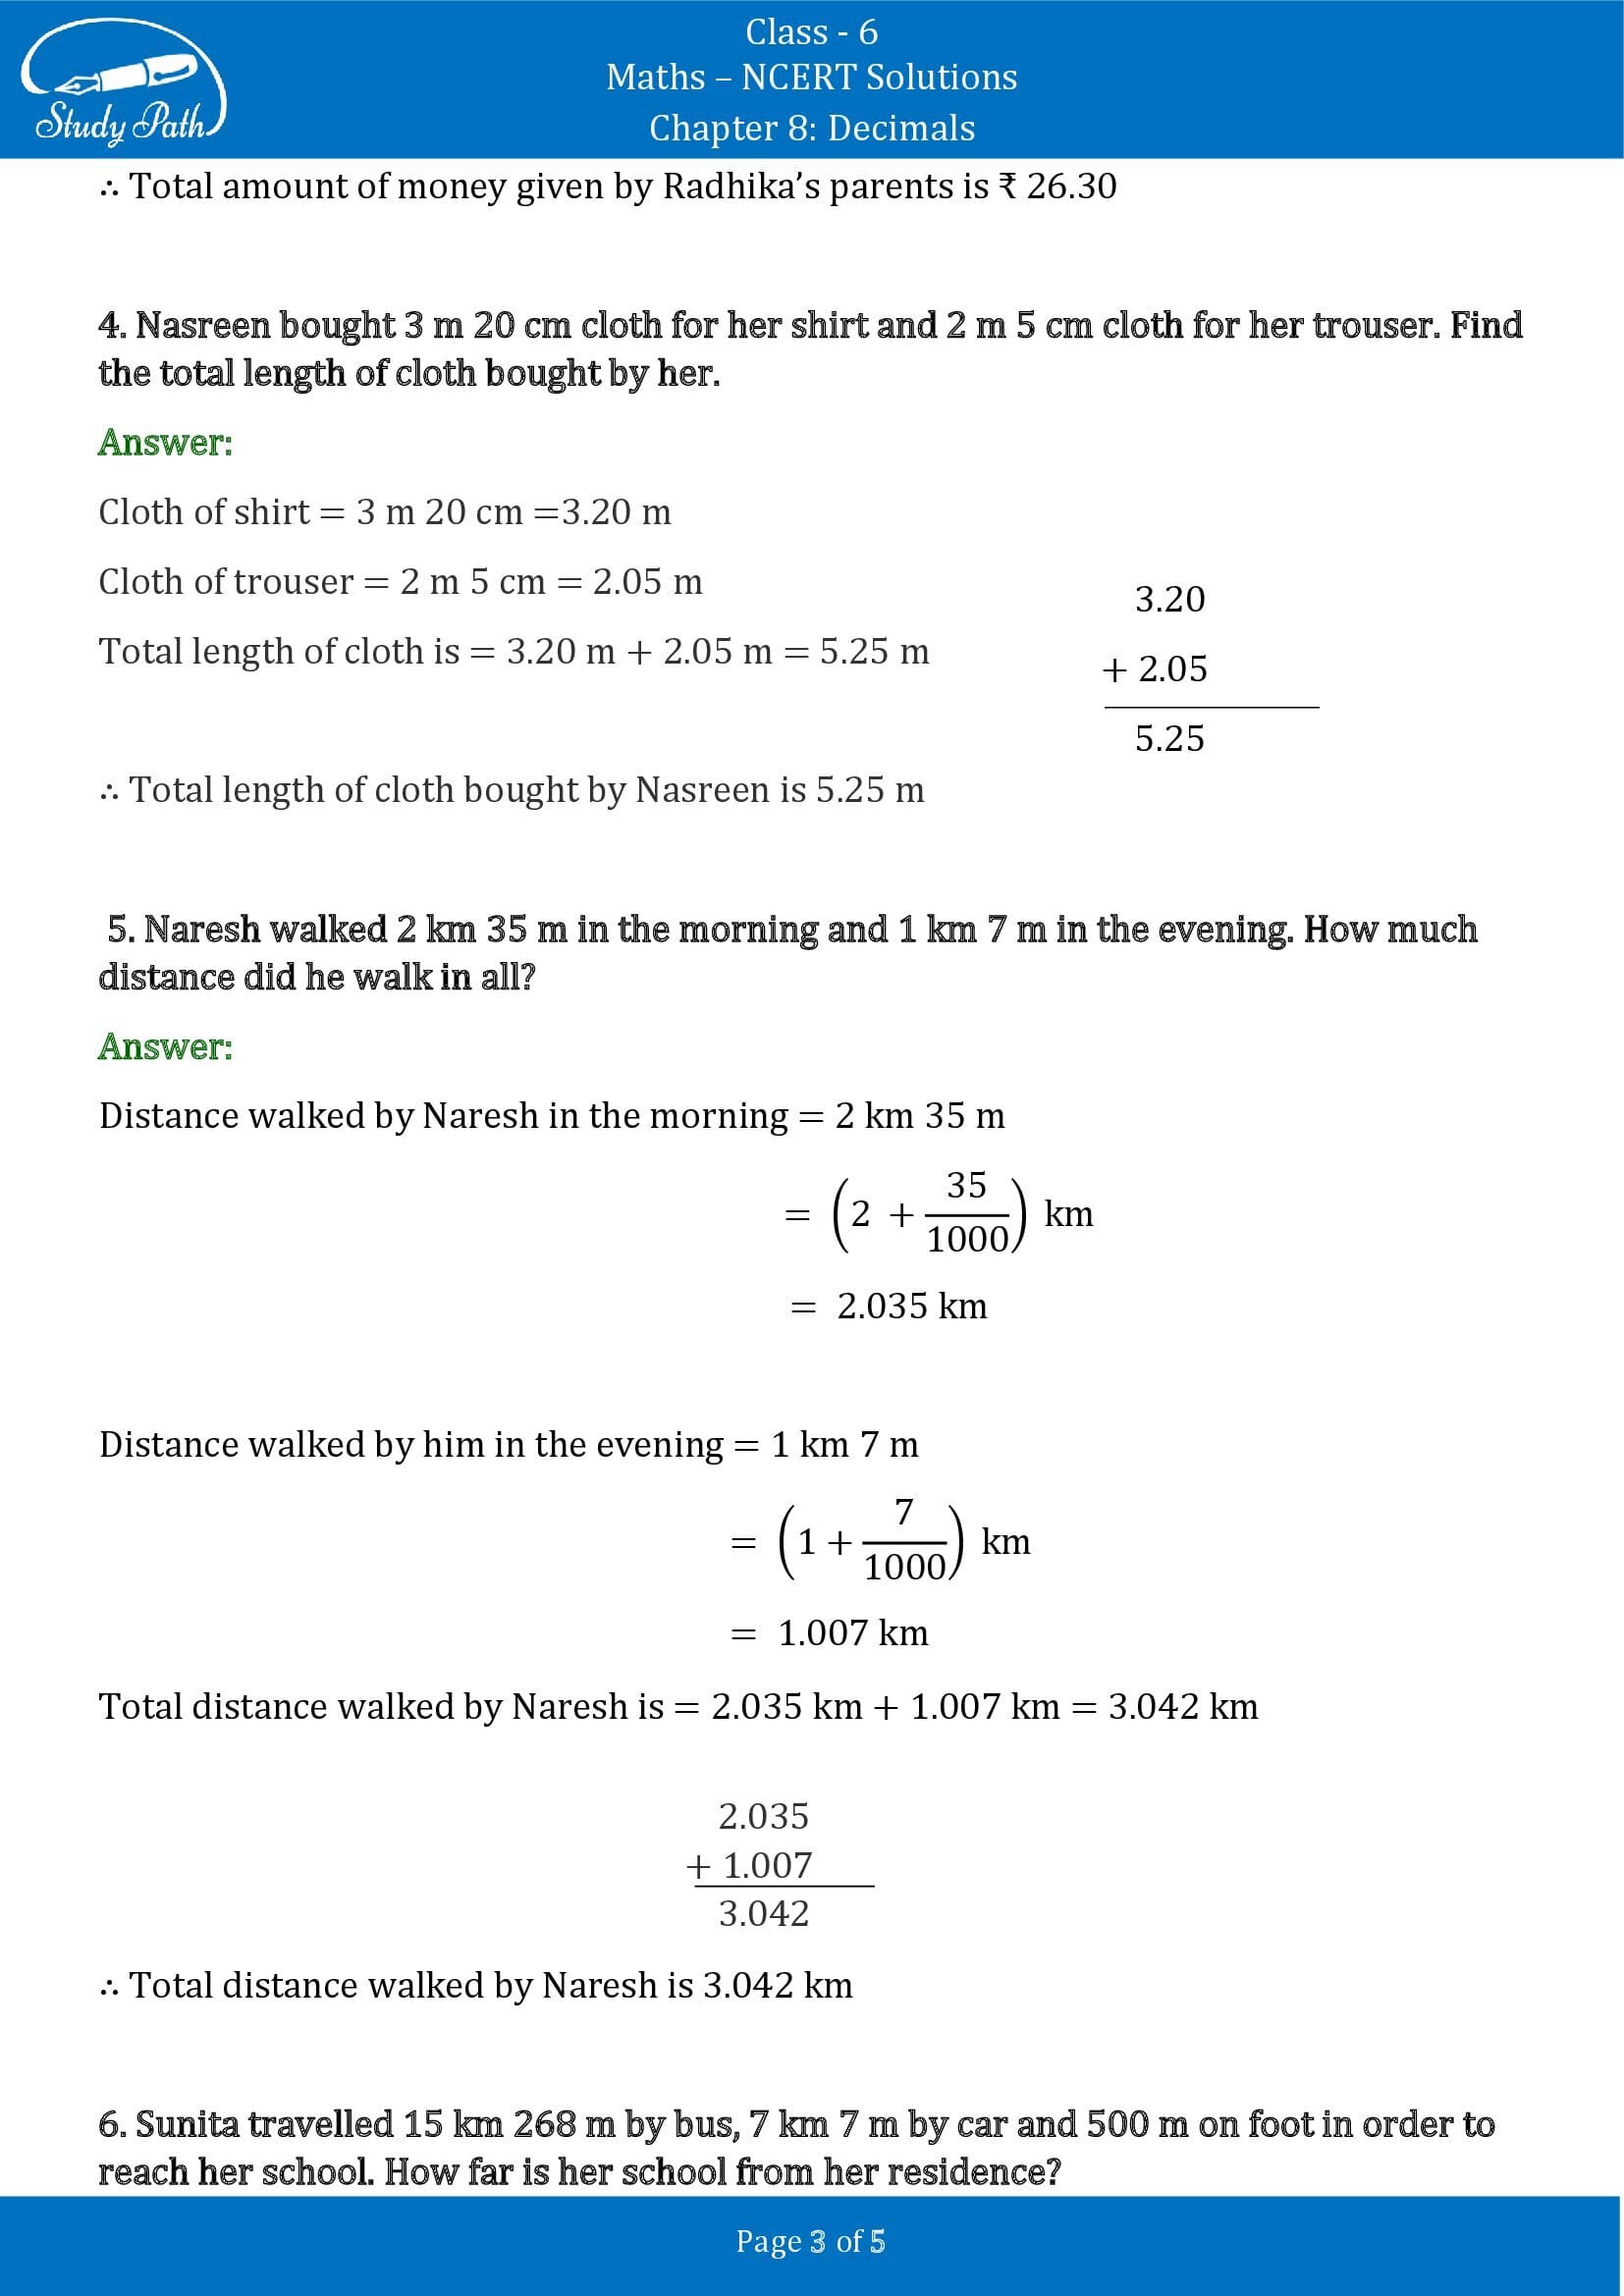 NCERT Solutions for Class 6 Maths Chapter 8 Decimals Exercise 8.5 00003